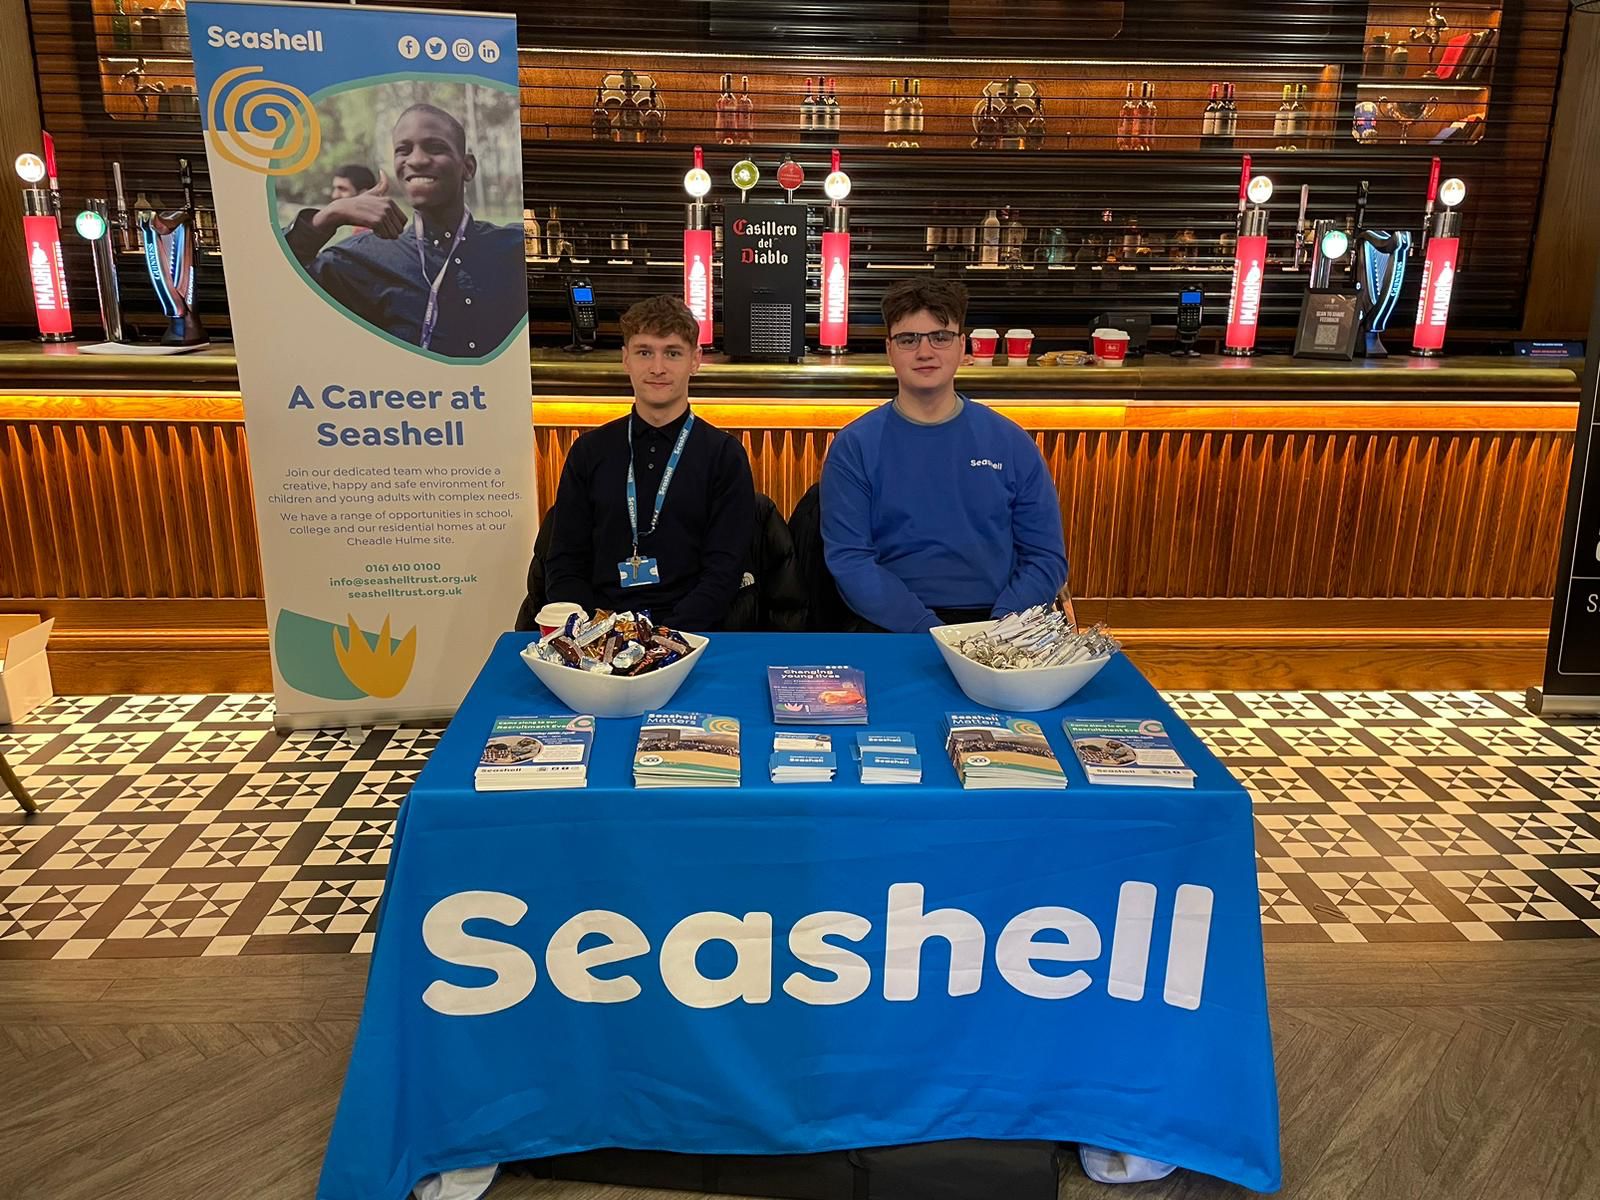 Seashell Trust at our event in Manchester